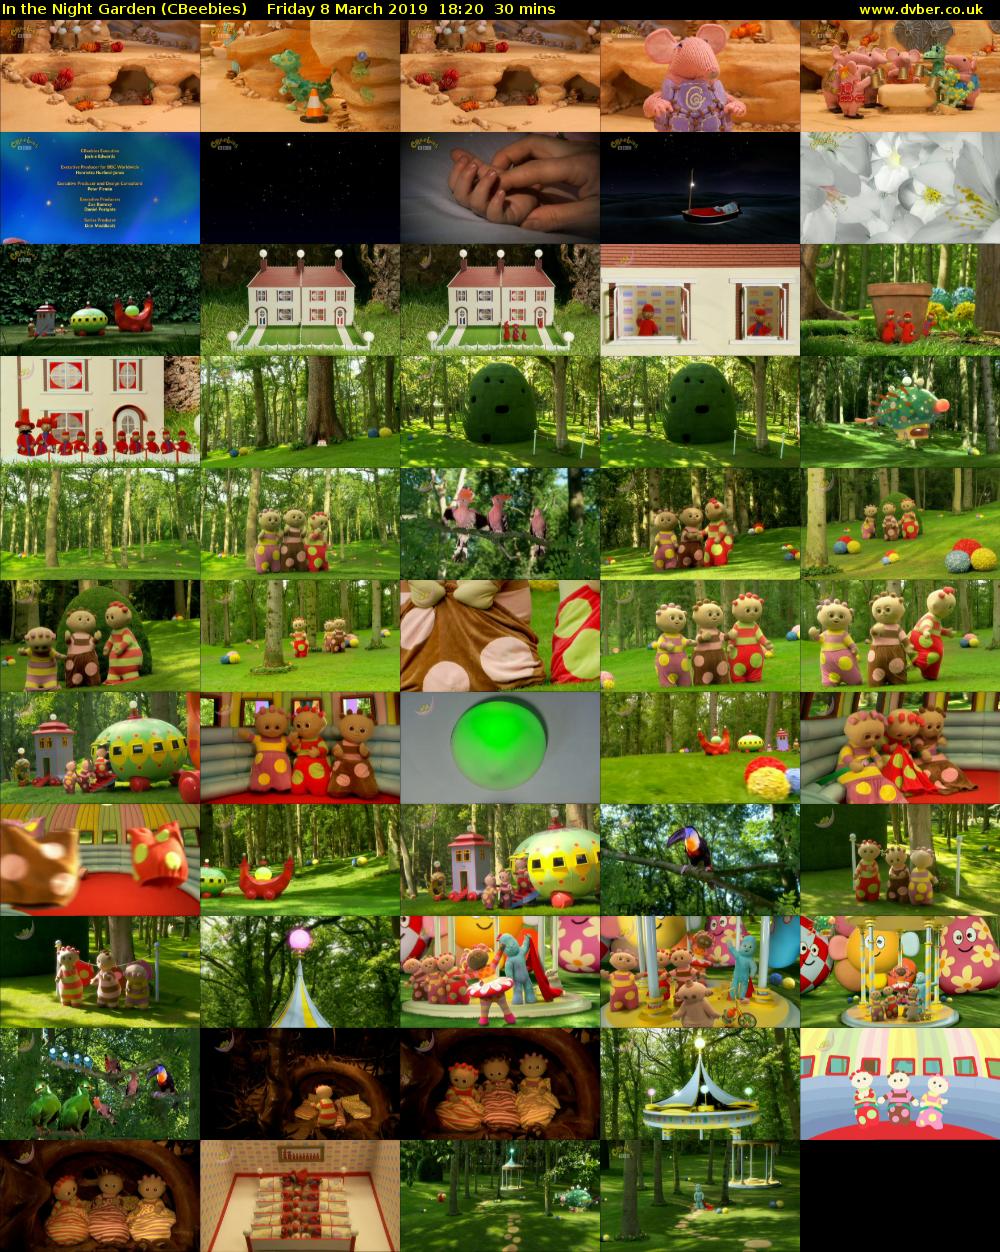 In the Night Garden (CBeebies) Friday 8 March 2019 18:20 - 18:50